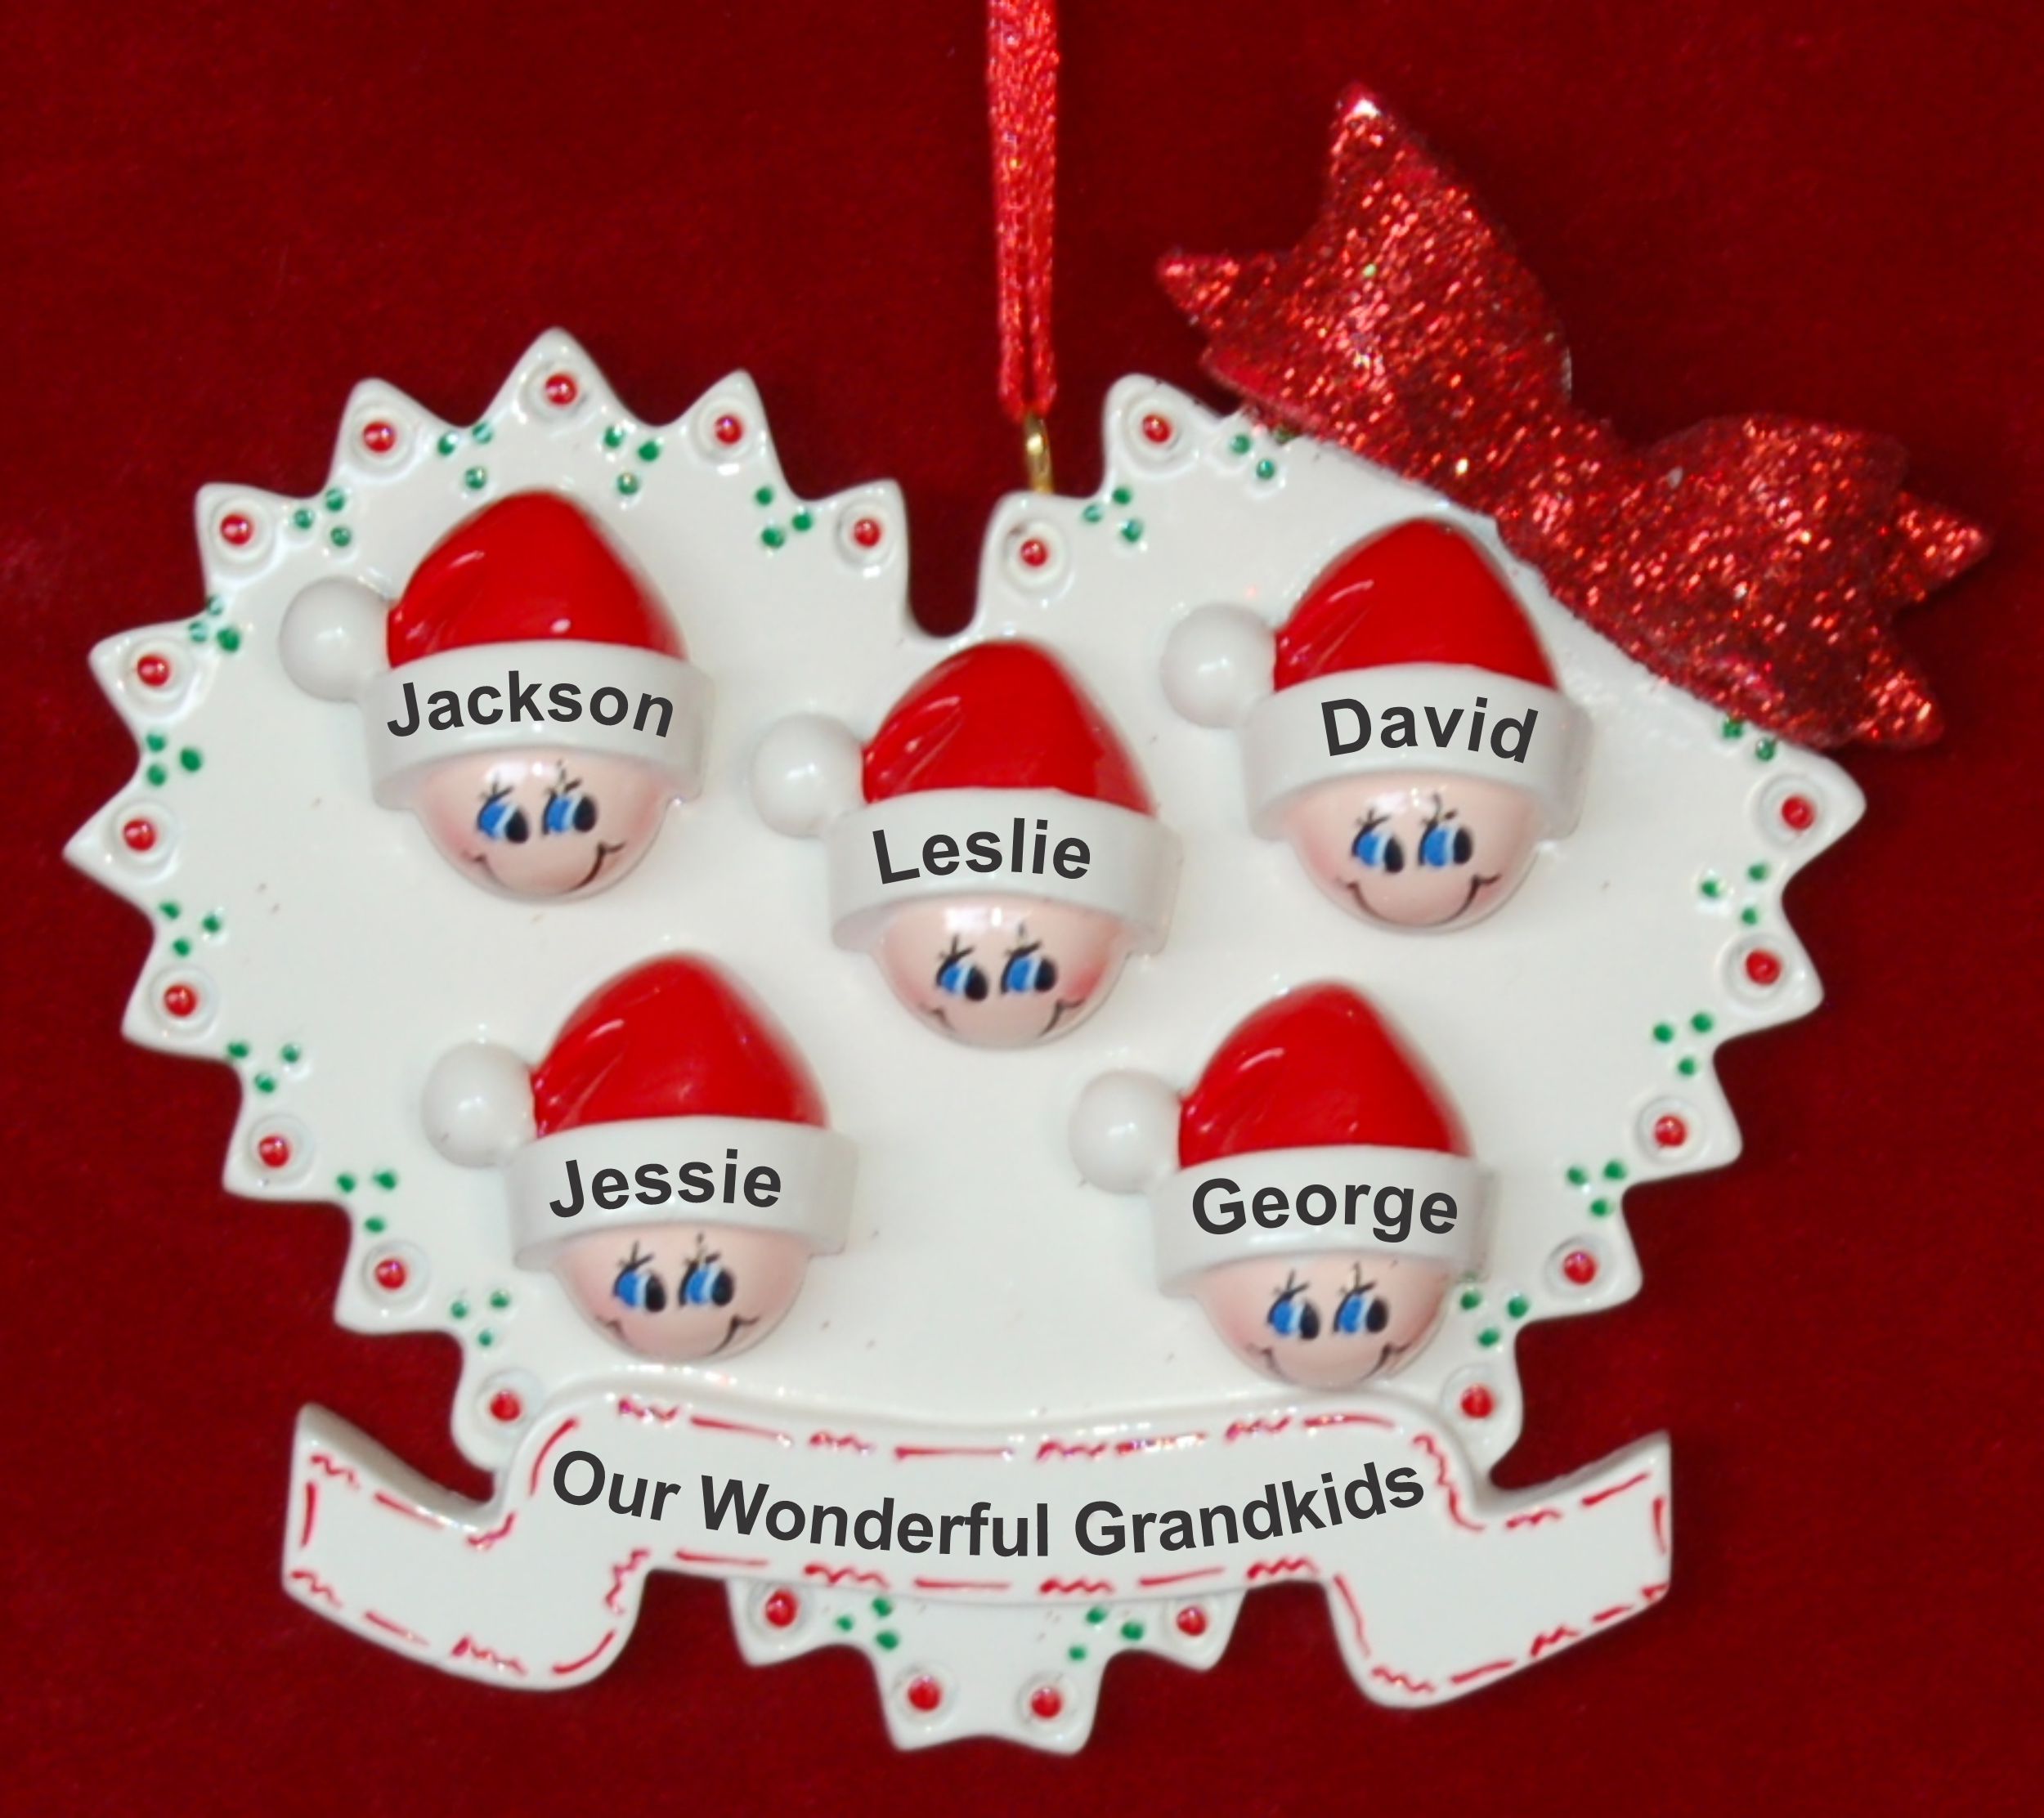 Grandparents Christmas Ornament Quilt of Love 5 Grandkids Personalized by RussellRhodes.com